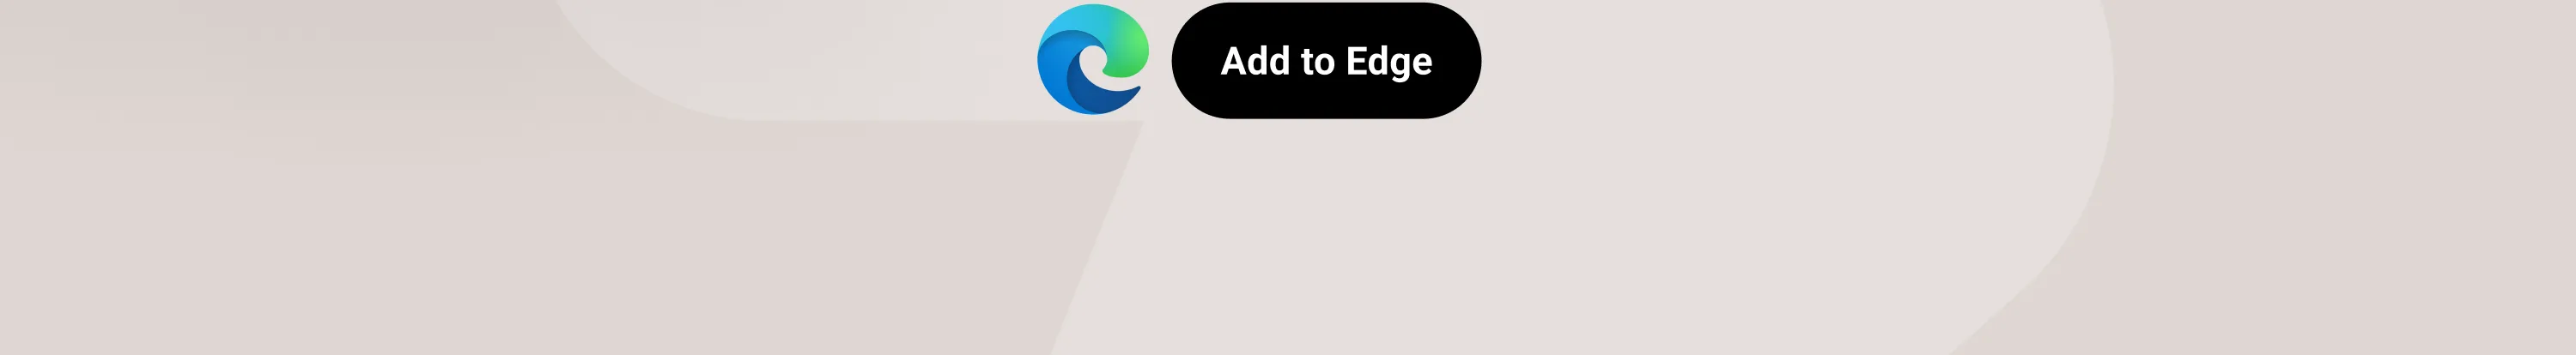 Add Extension to Edge